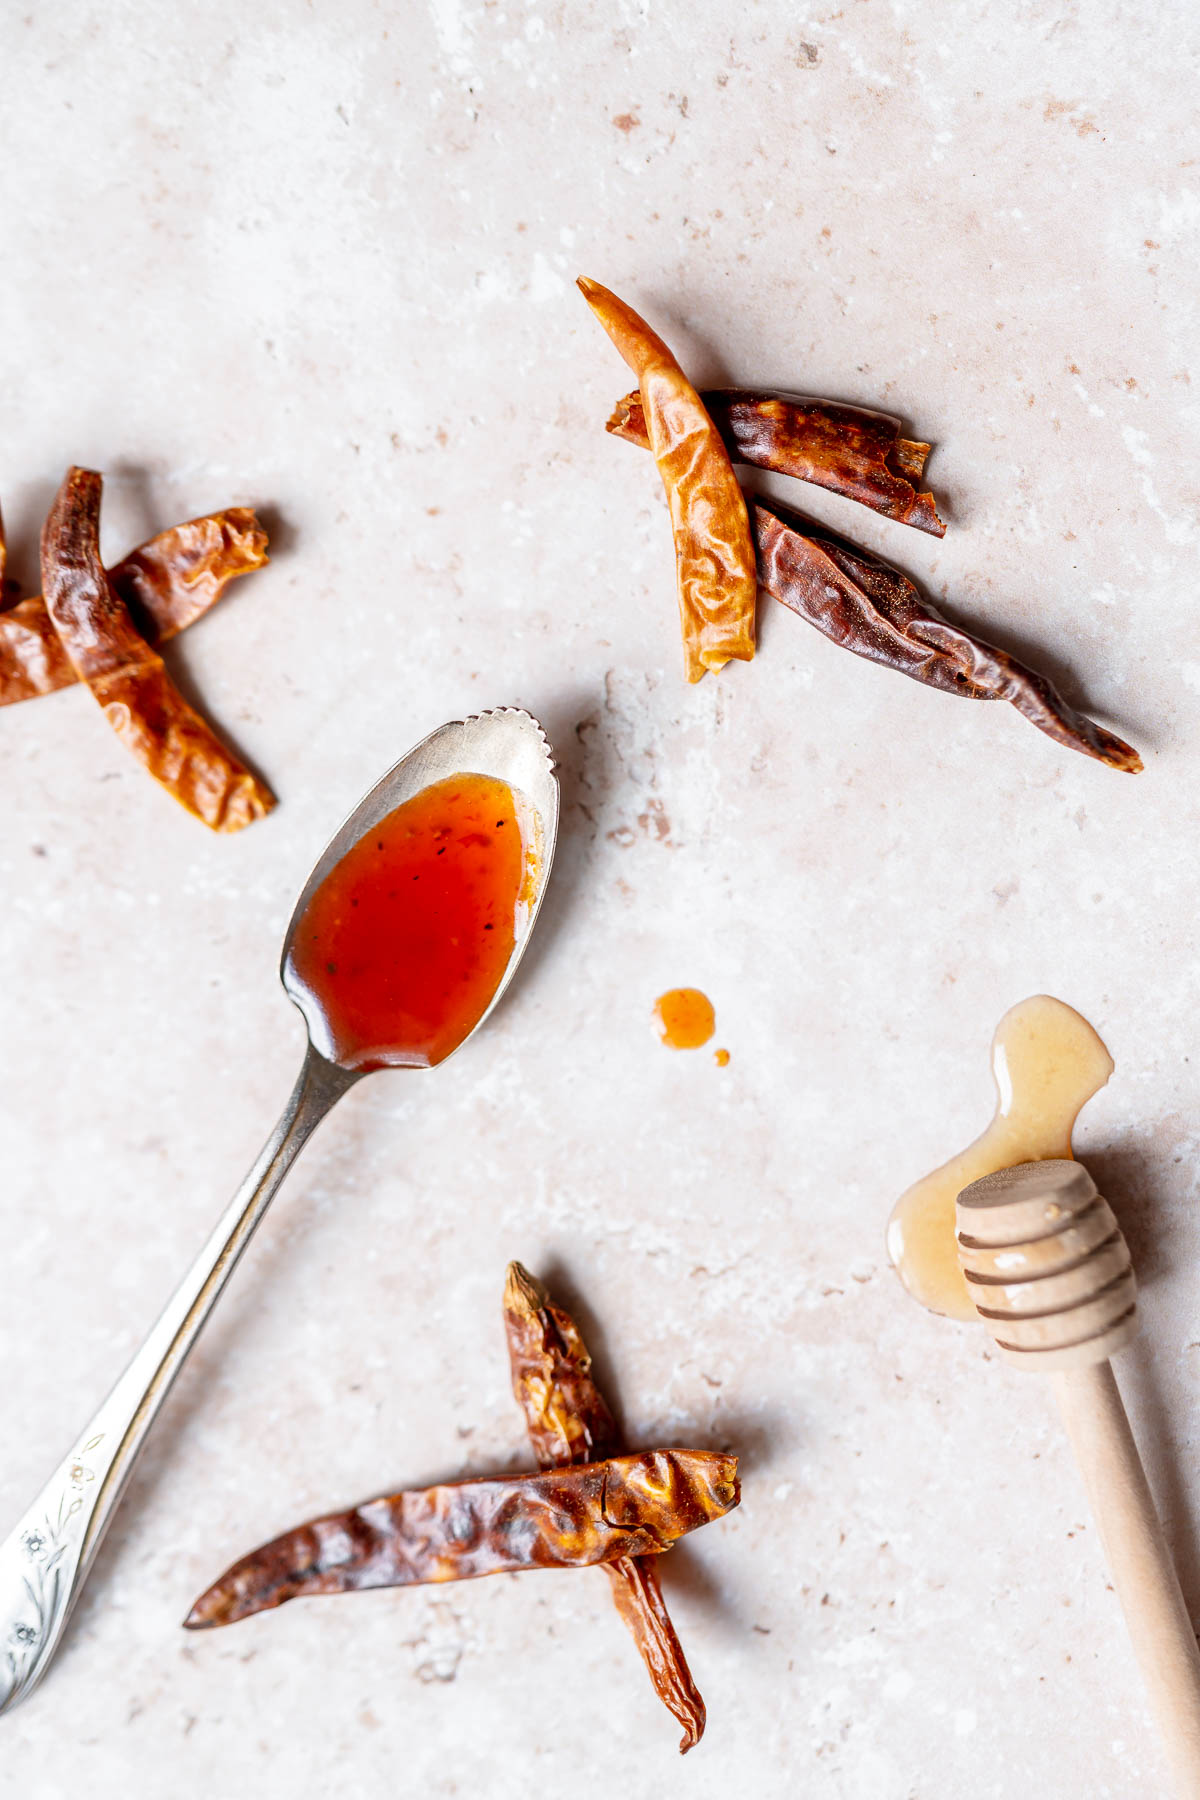 Top view of a silver spoon filled with a bright red sauce resting on a table surrounded by dried chiles and a wooden honey spoon dripping with honey.